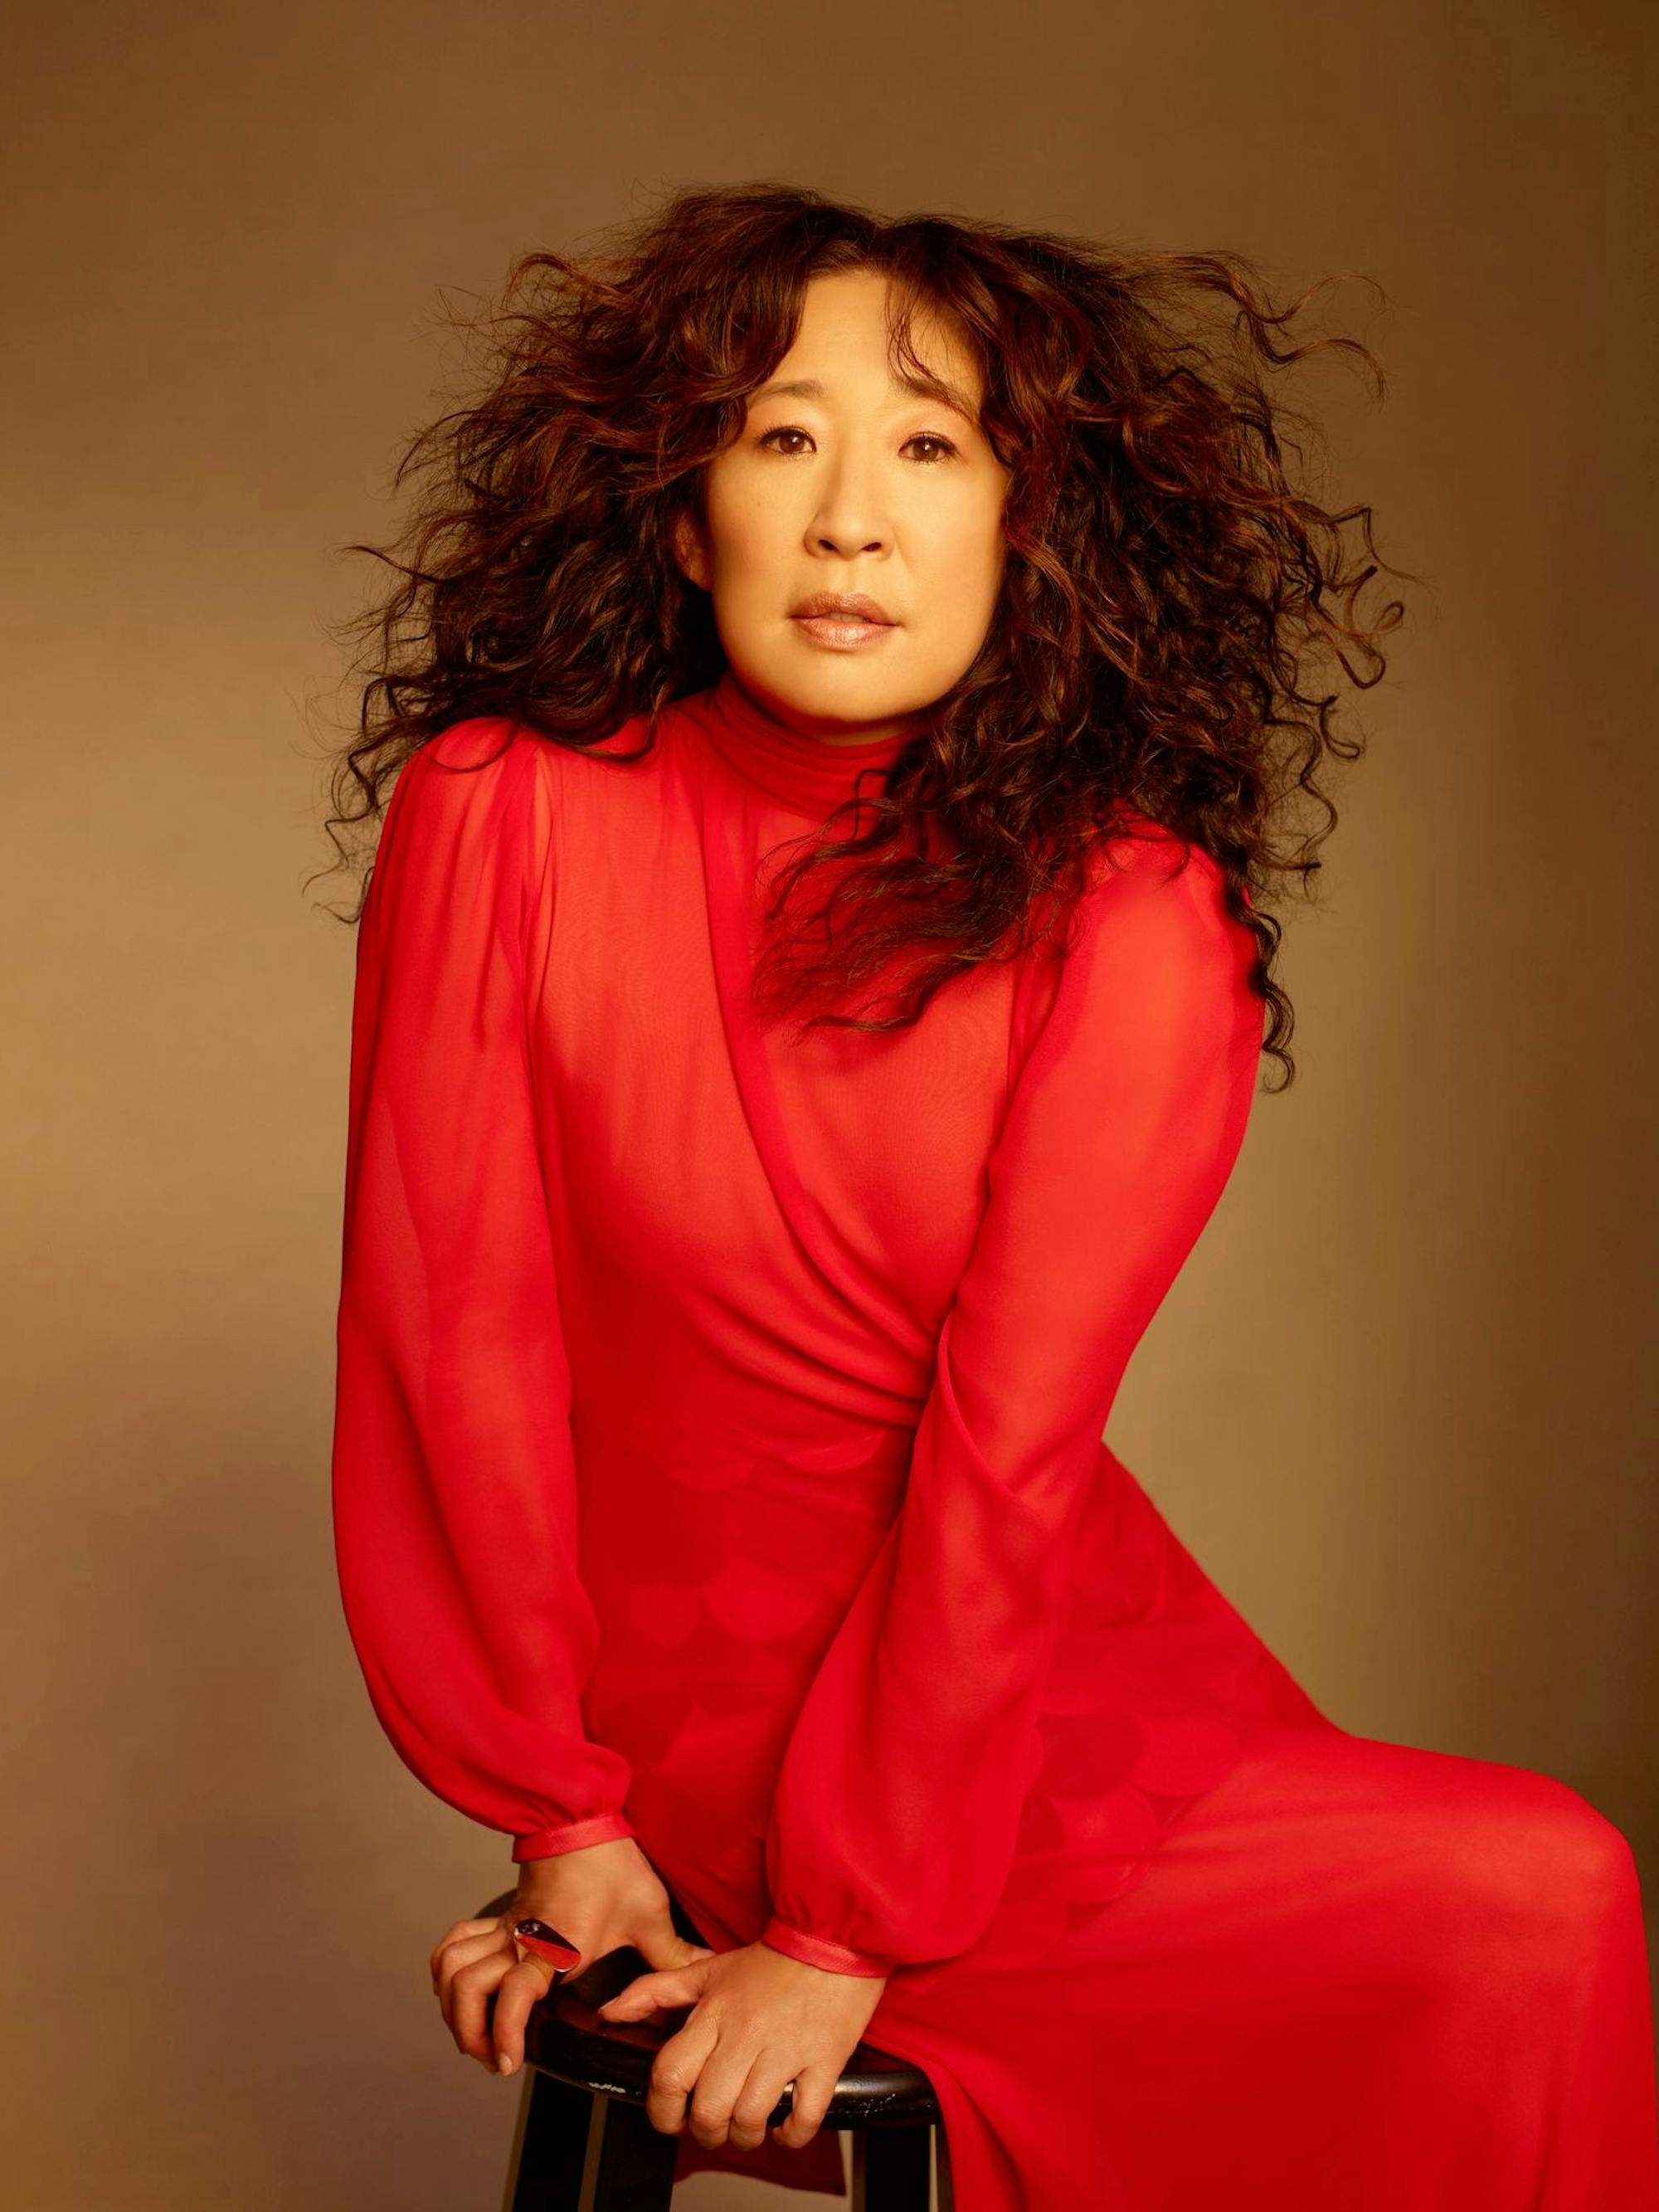 Sandra Oh wears a red dress and sits on a stool looking directly at the camera. Her hair is wild and her face is lit by a warm light.